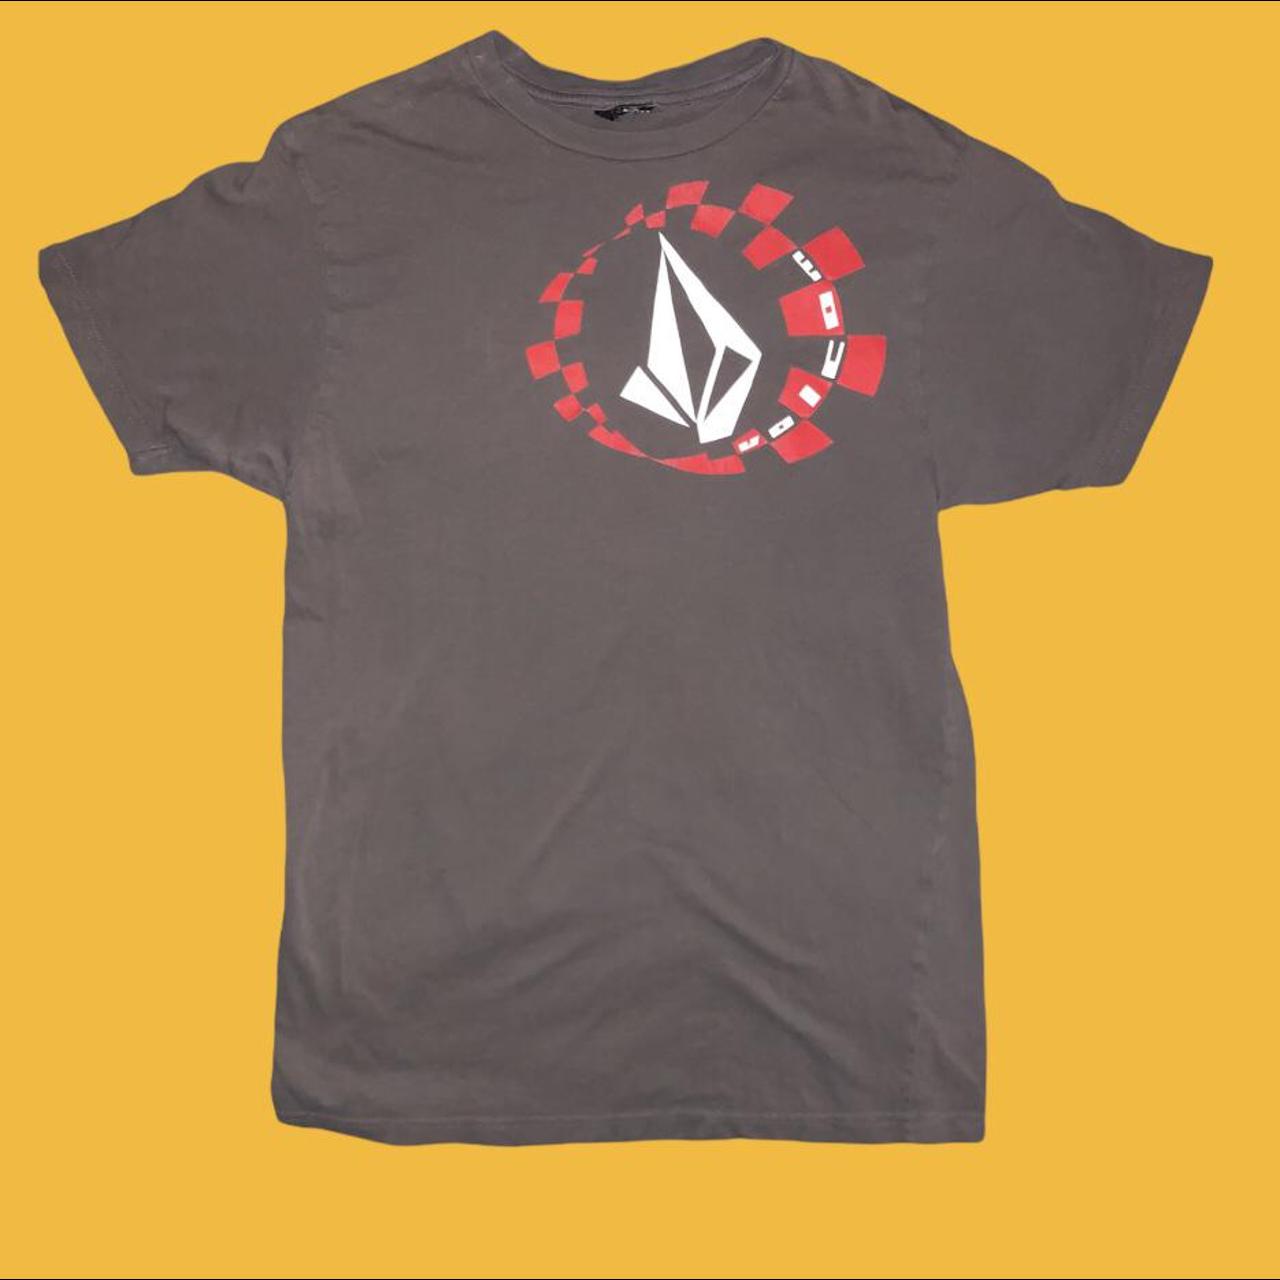 Product Image 1 - Volcom Tee 

No tag, likely